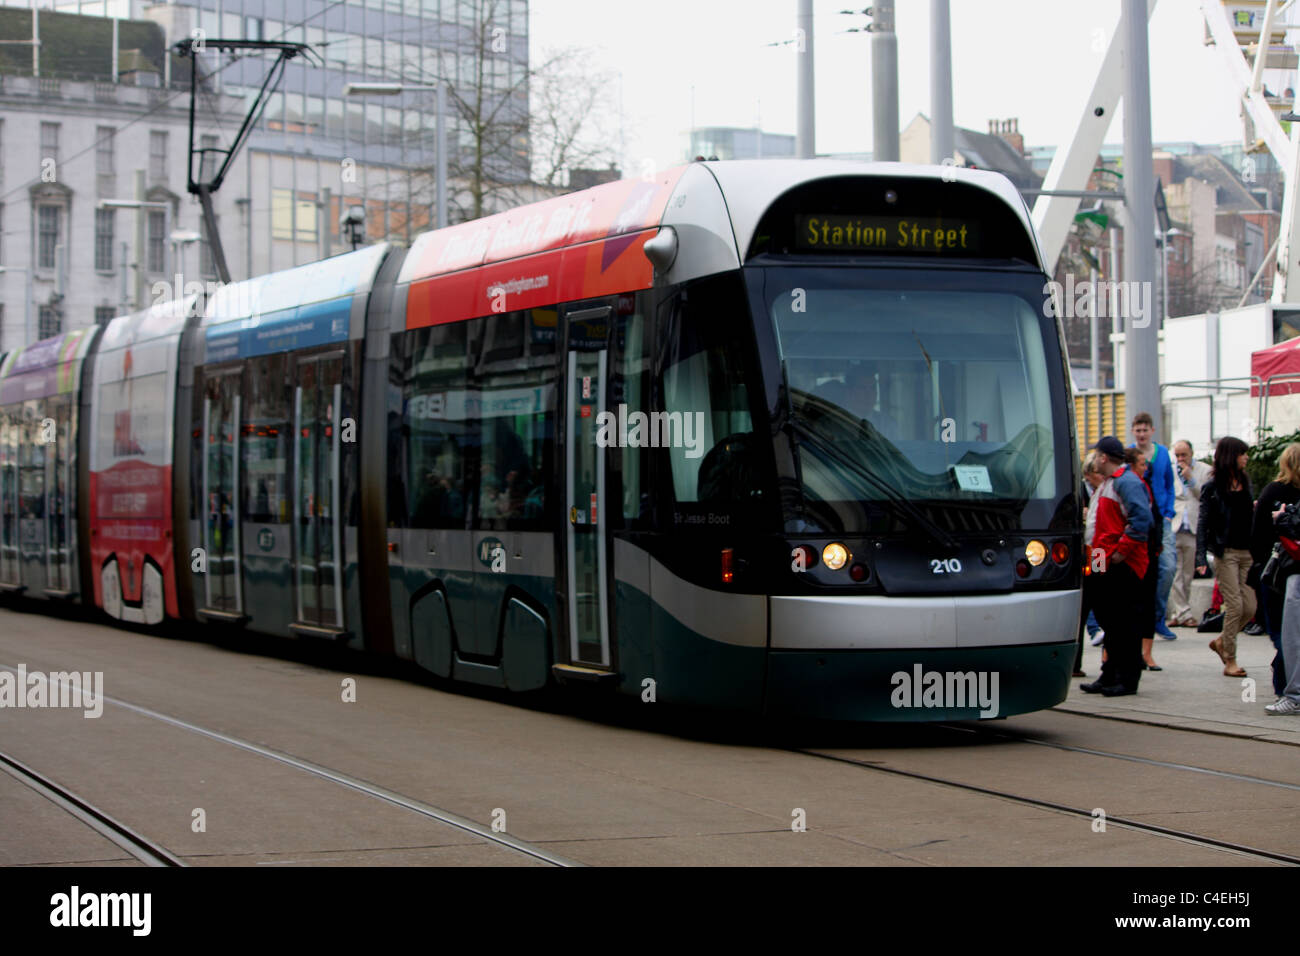 A modern tram in Nottingham city centre taking the general public, it's passengers to Station Street. Stock Photo